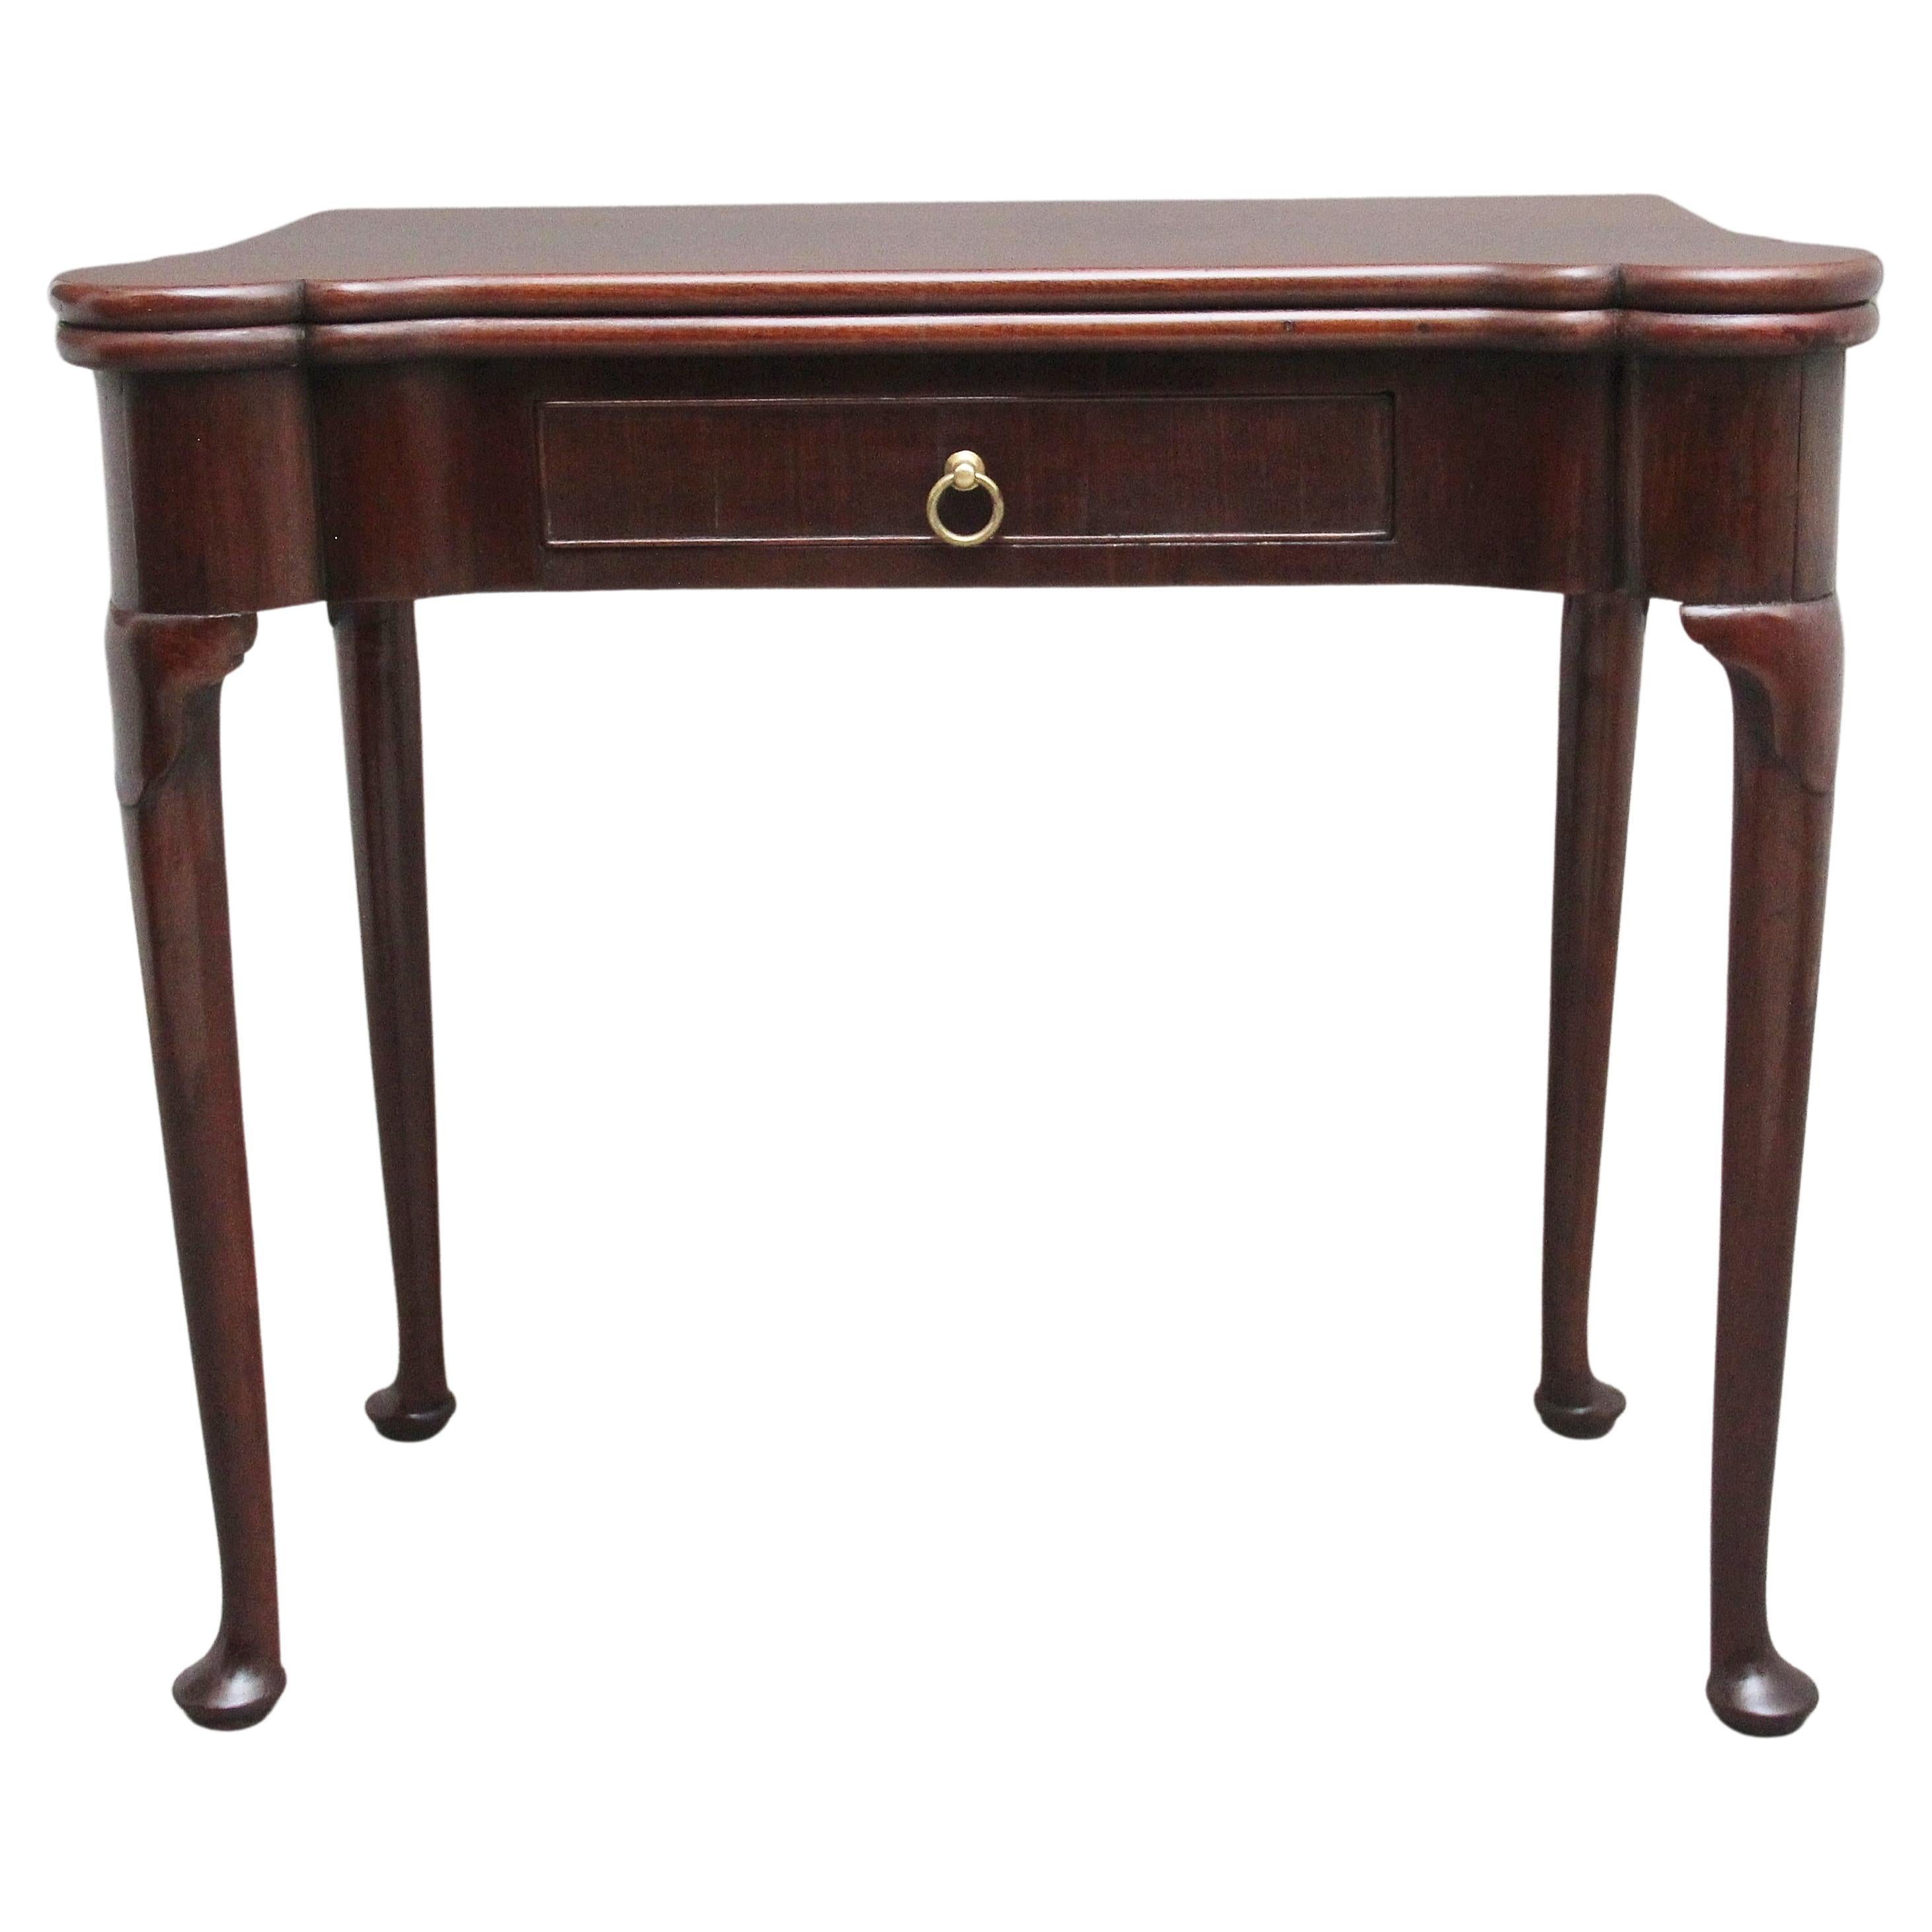 Lovely Quality Mid-18th Century Mahogany Card Table For Sale